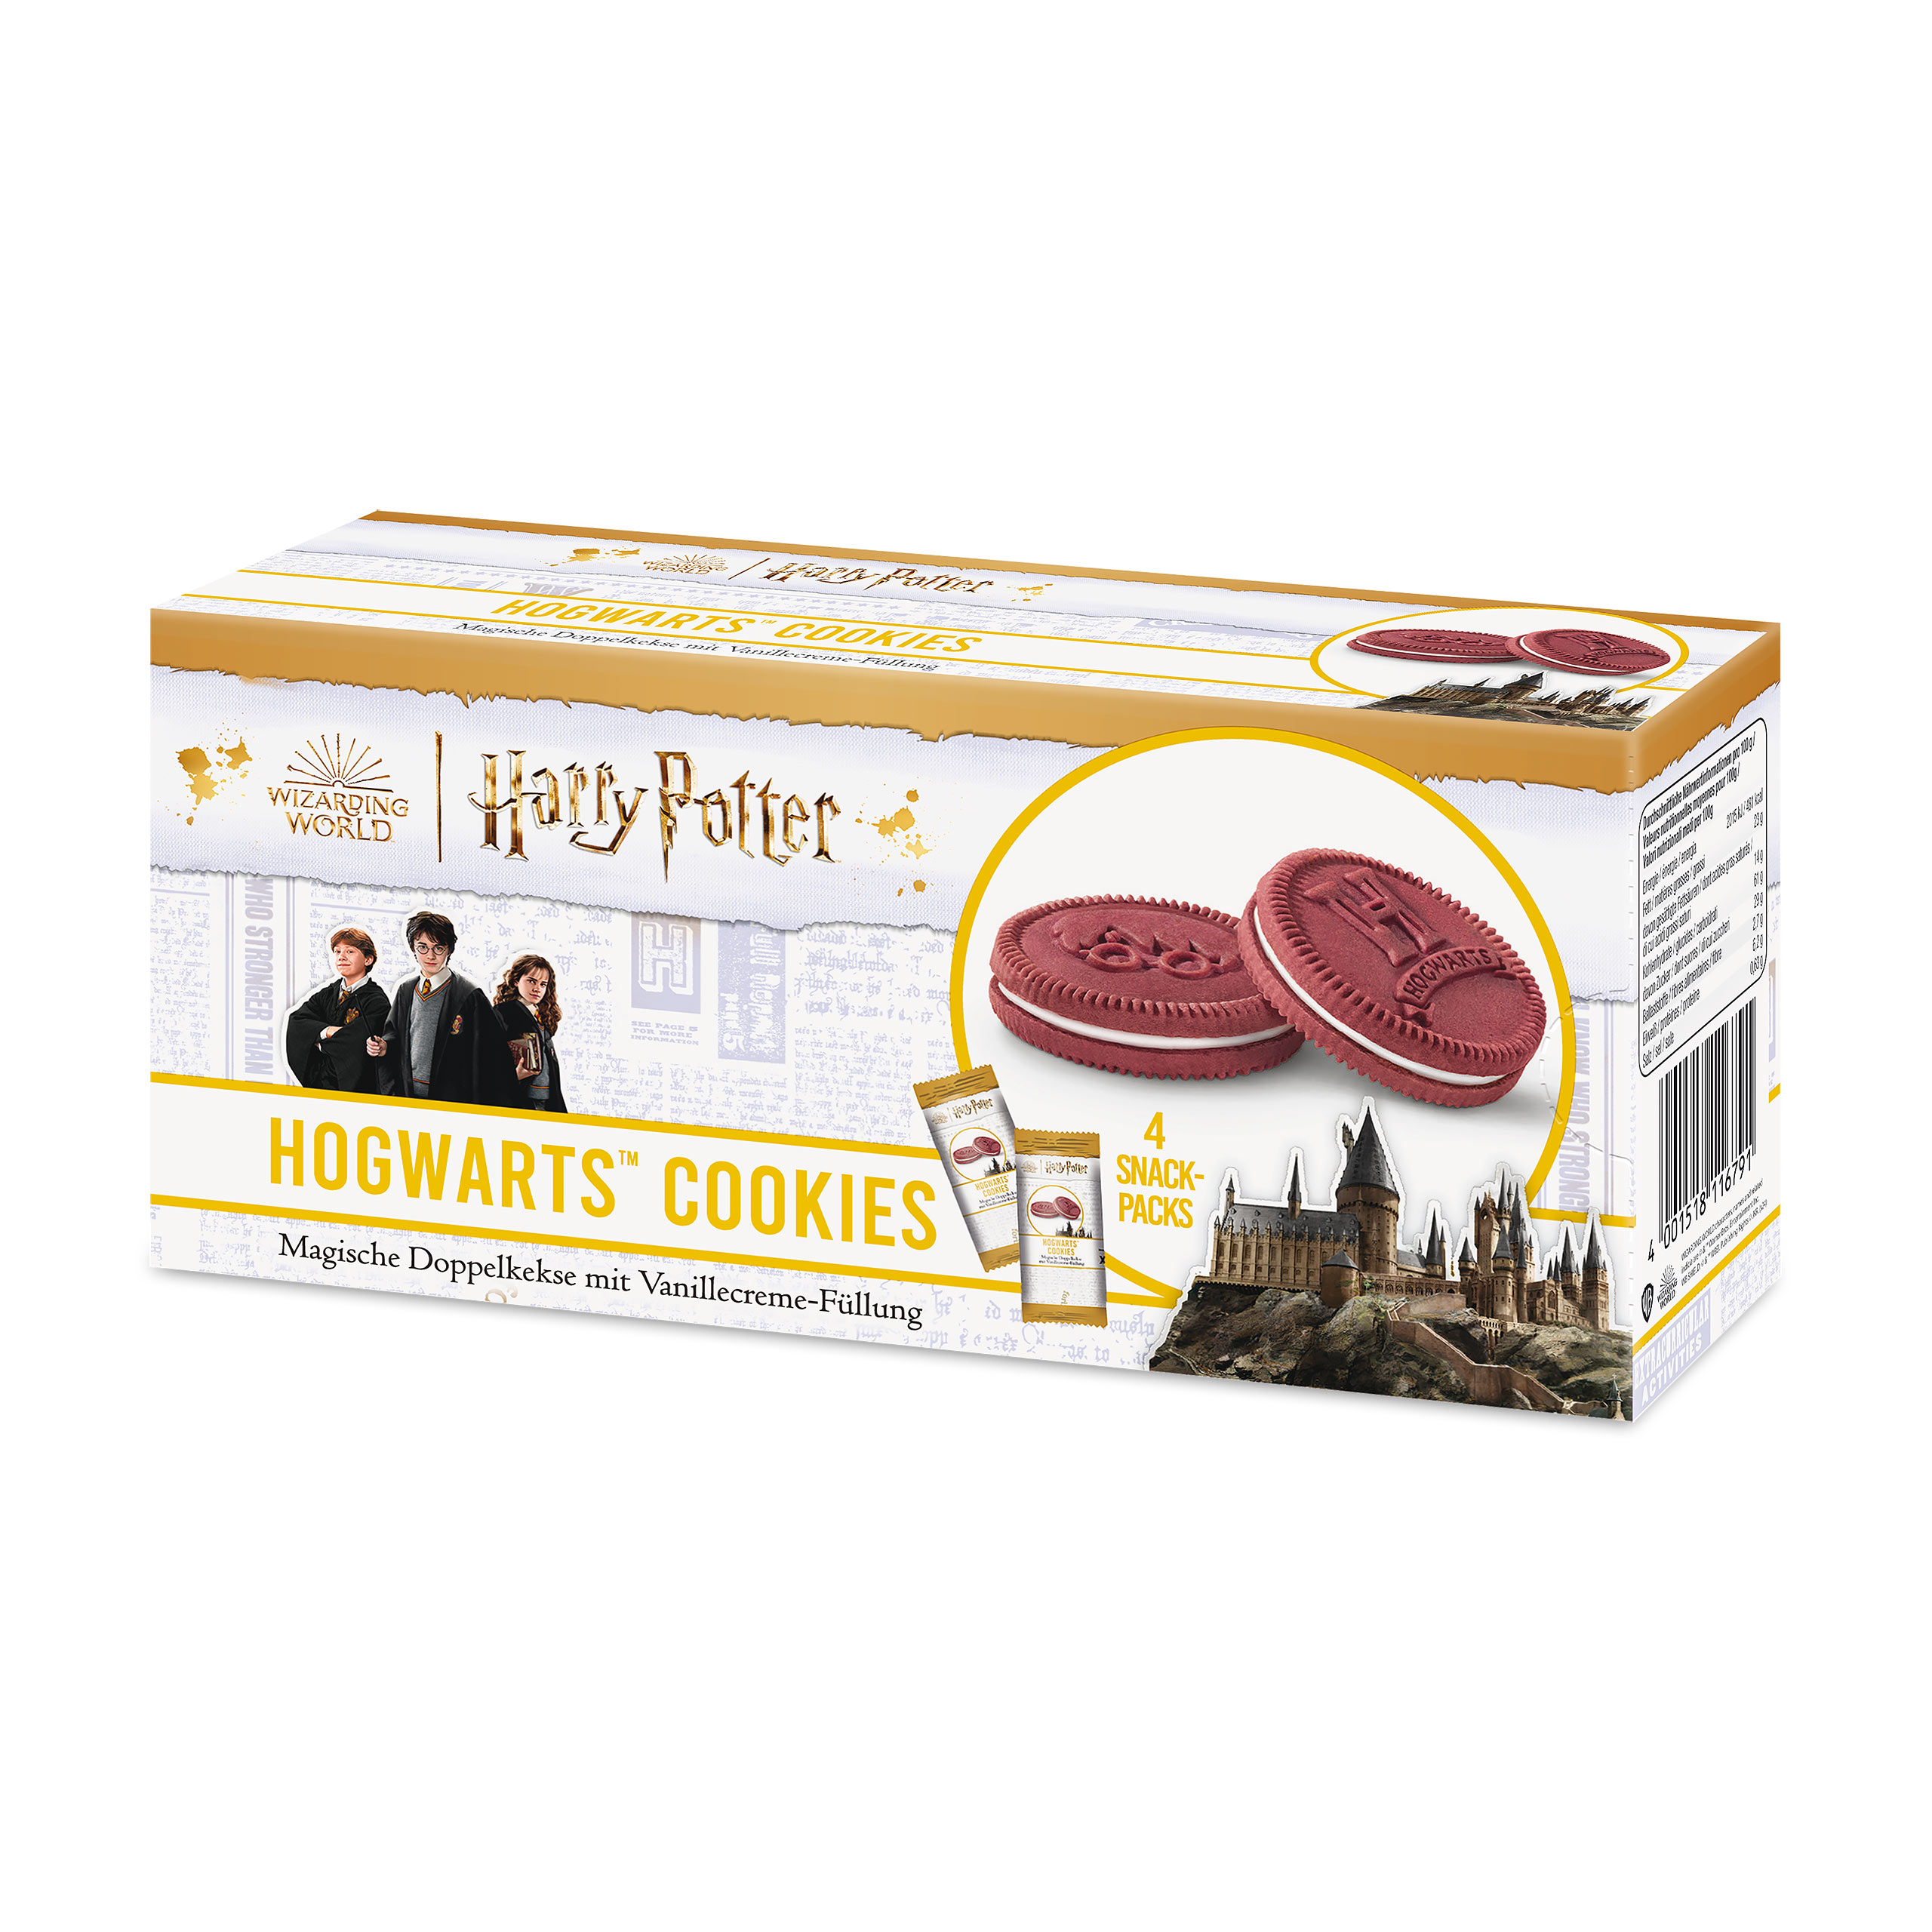 Harry Potter - Hogwarts Cookies with Vanilla Cream Filling